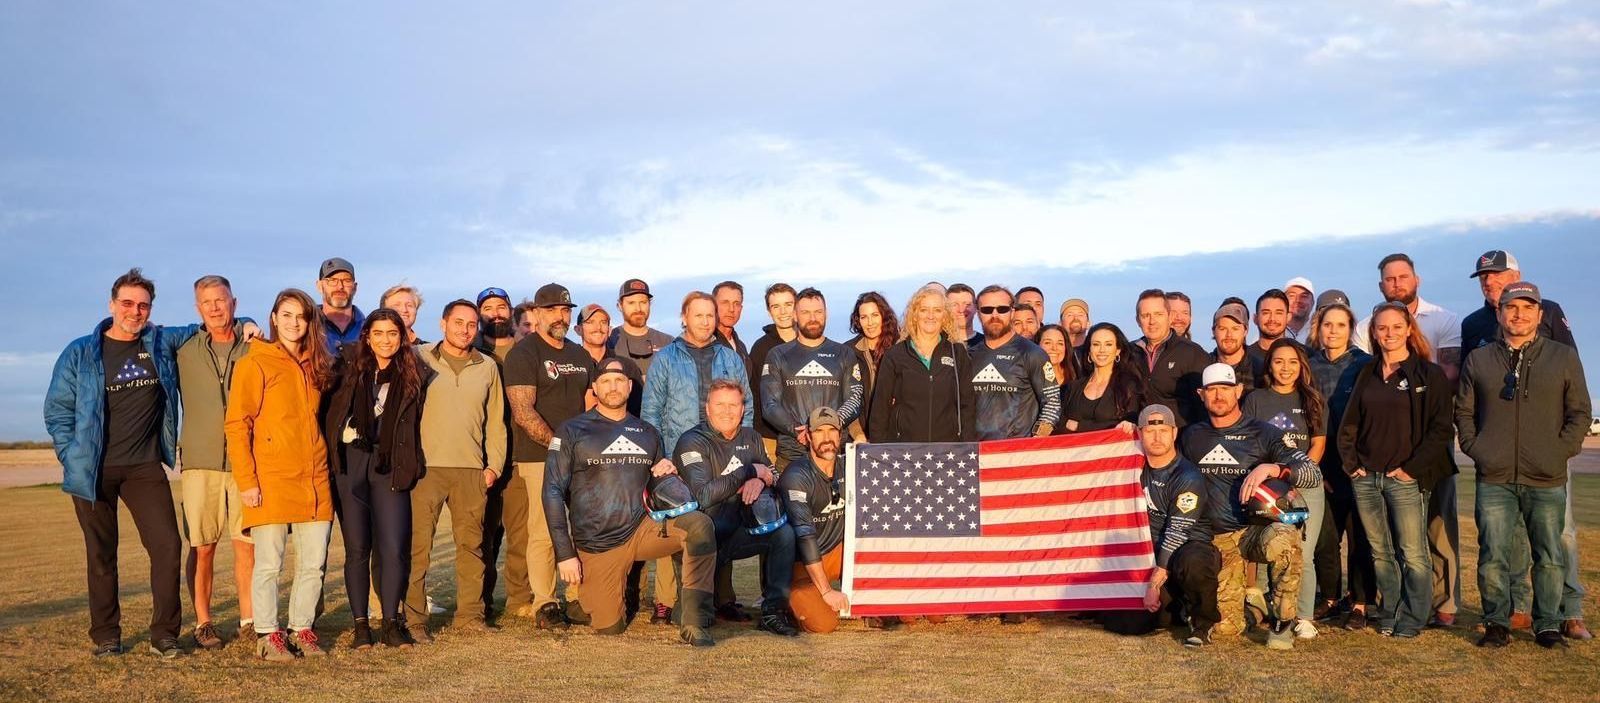 Fastest time to skydive all Seven continents: Legacy Expeditions Skydiving Team